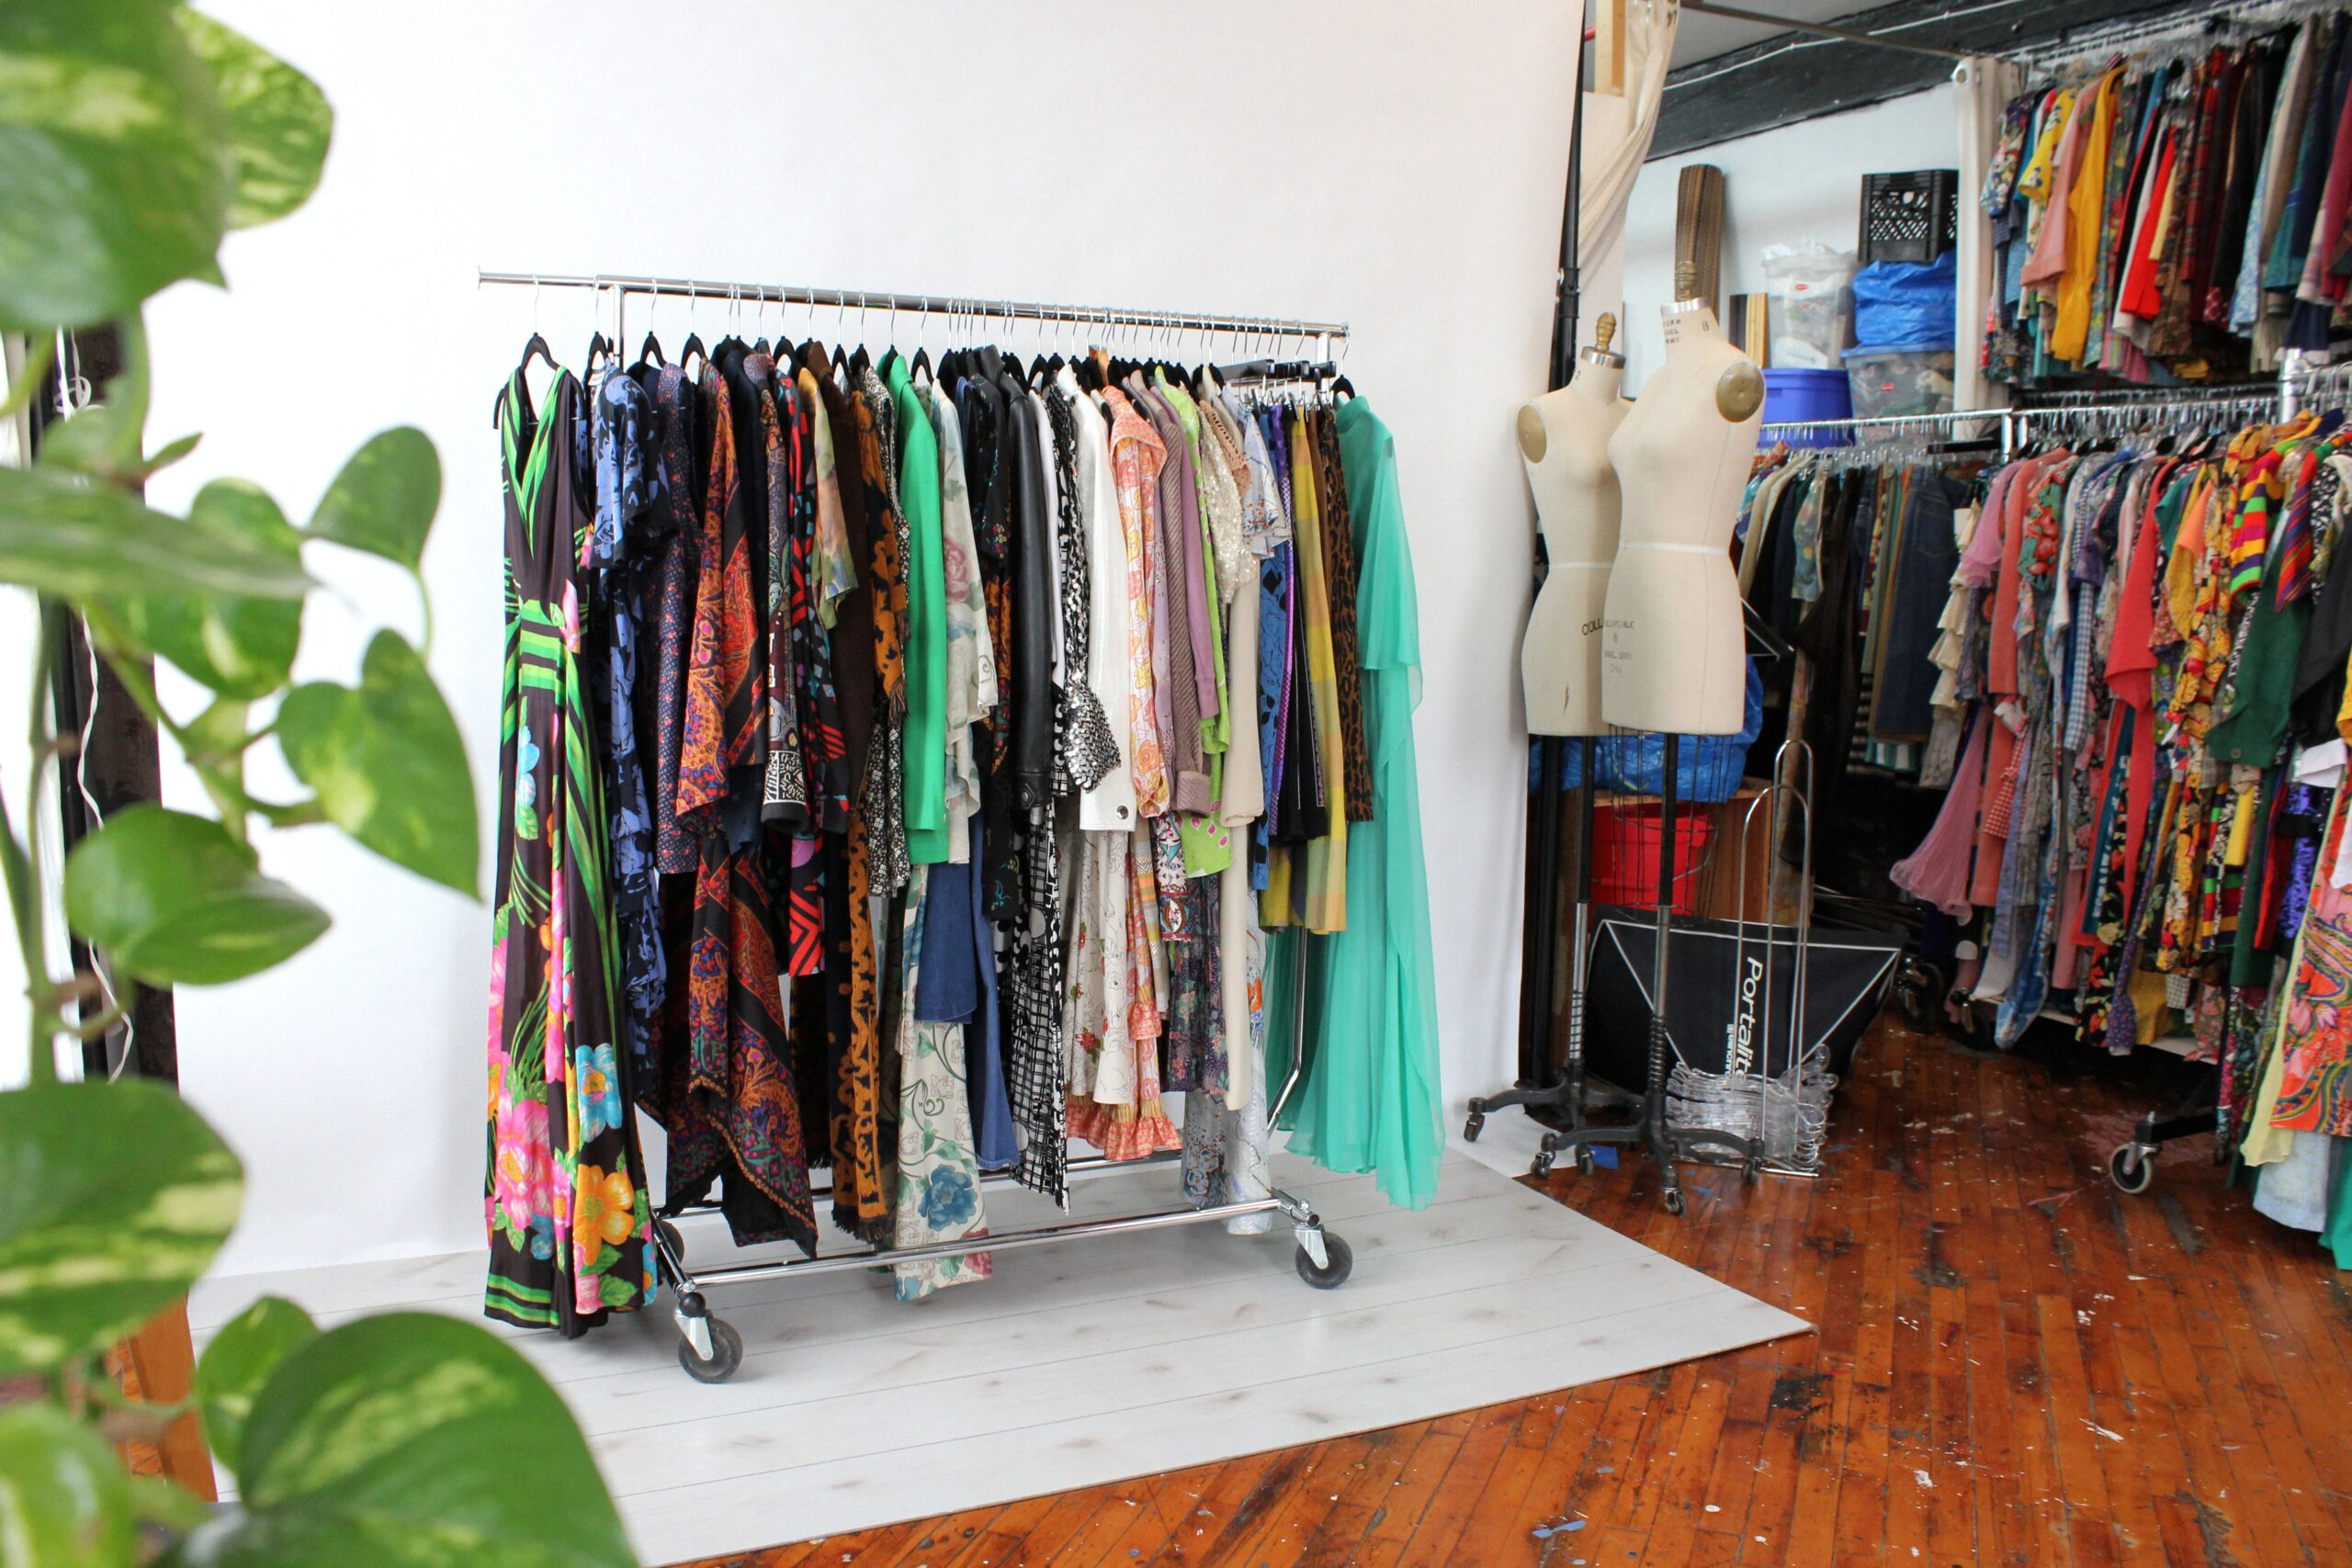 A clothing rack filled with vintage clothing in a boutique